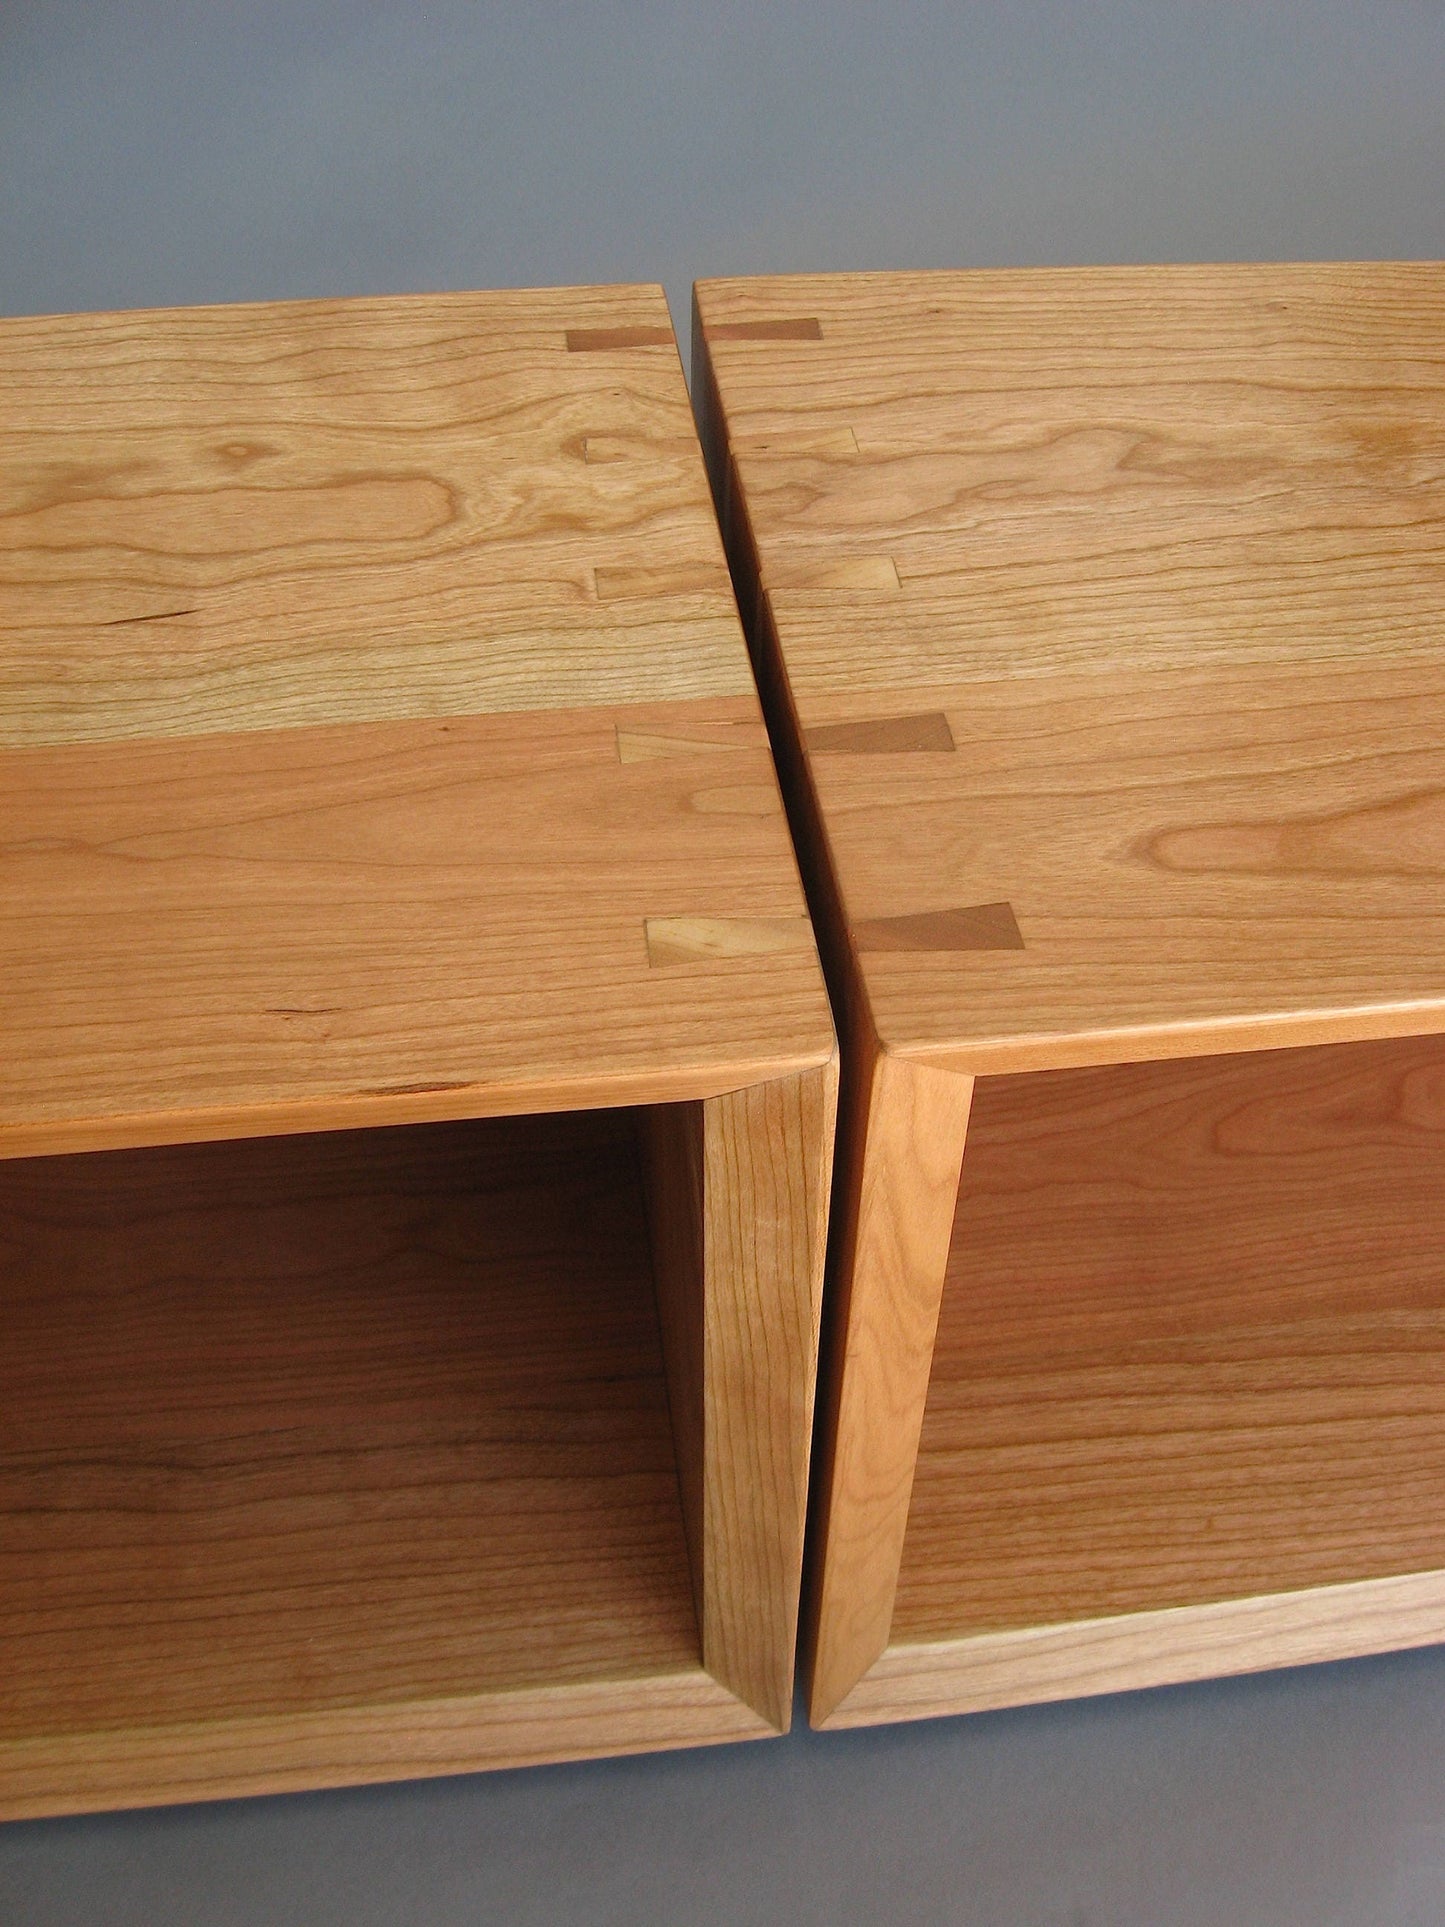 Solid Cherry Wood Bench/Display Console